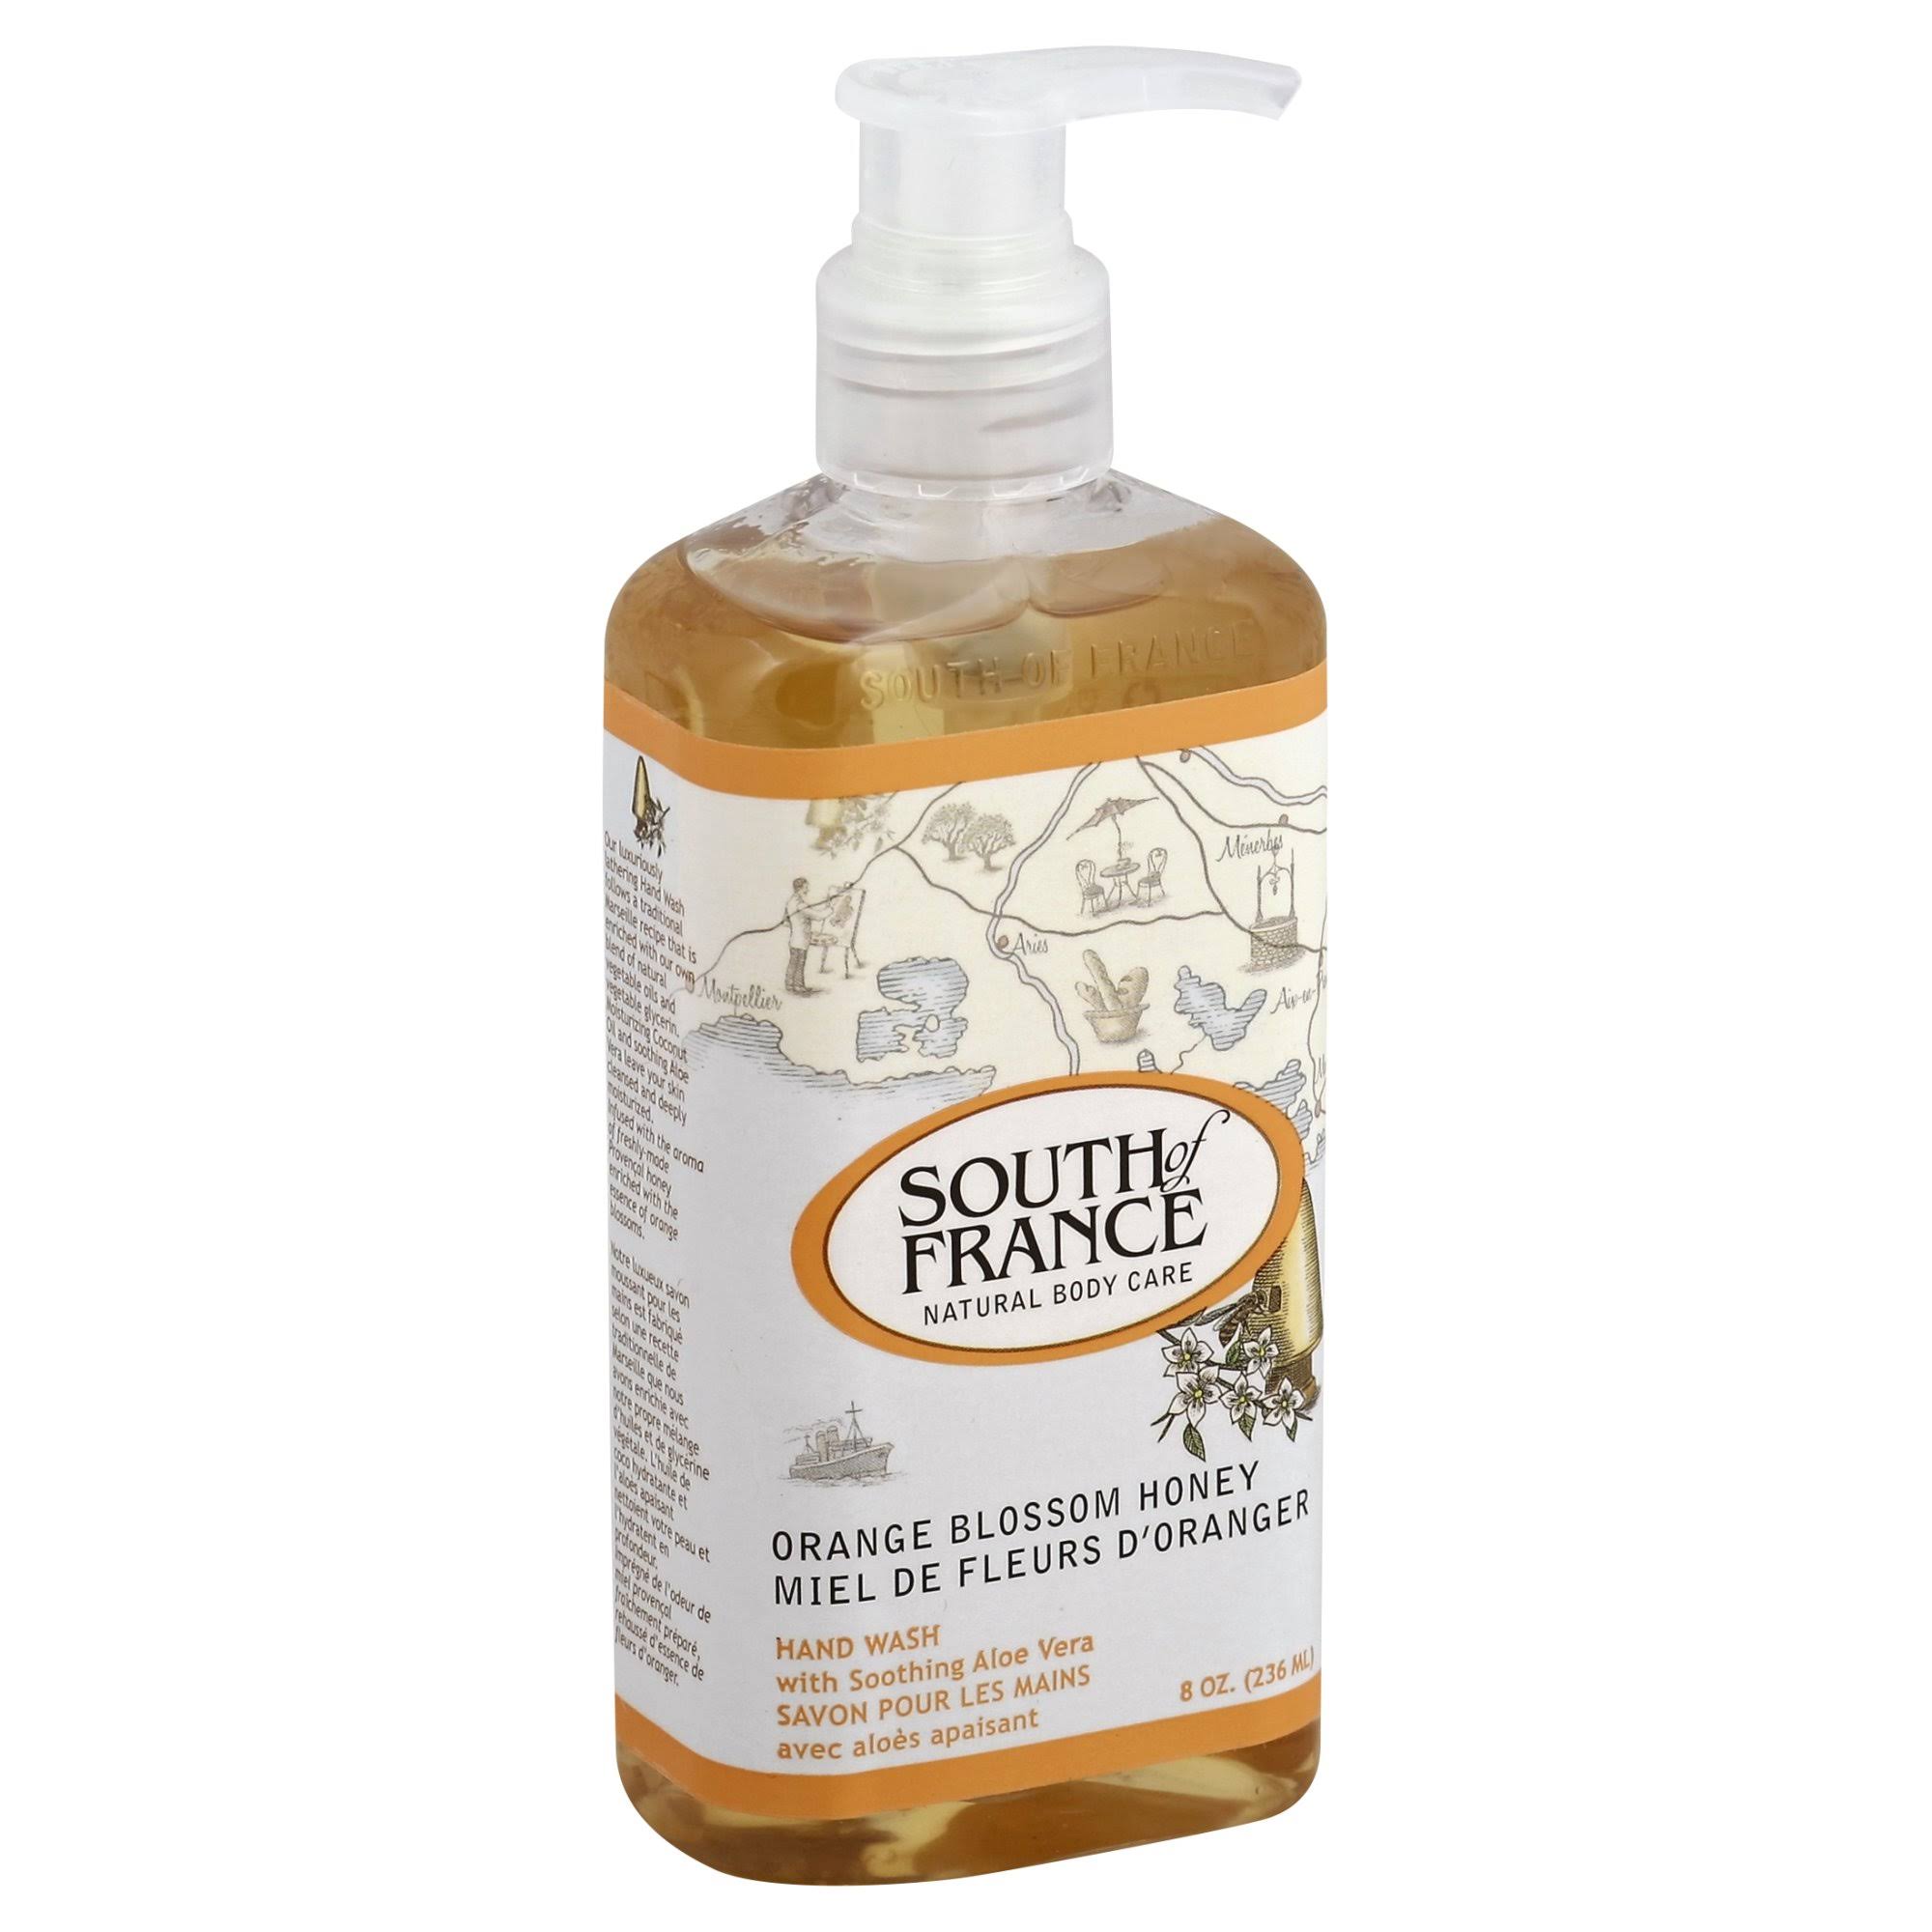 South of France Hand Wash with Soothing Aloe Vera - Orange Blossom Honey, 236ml